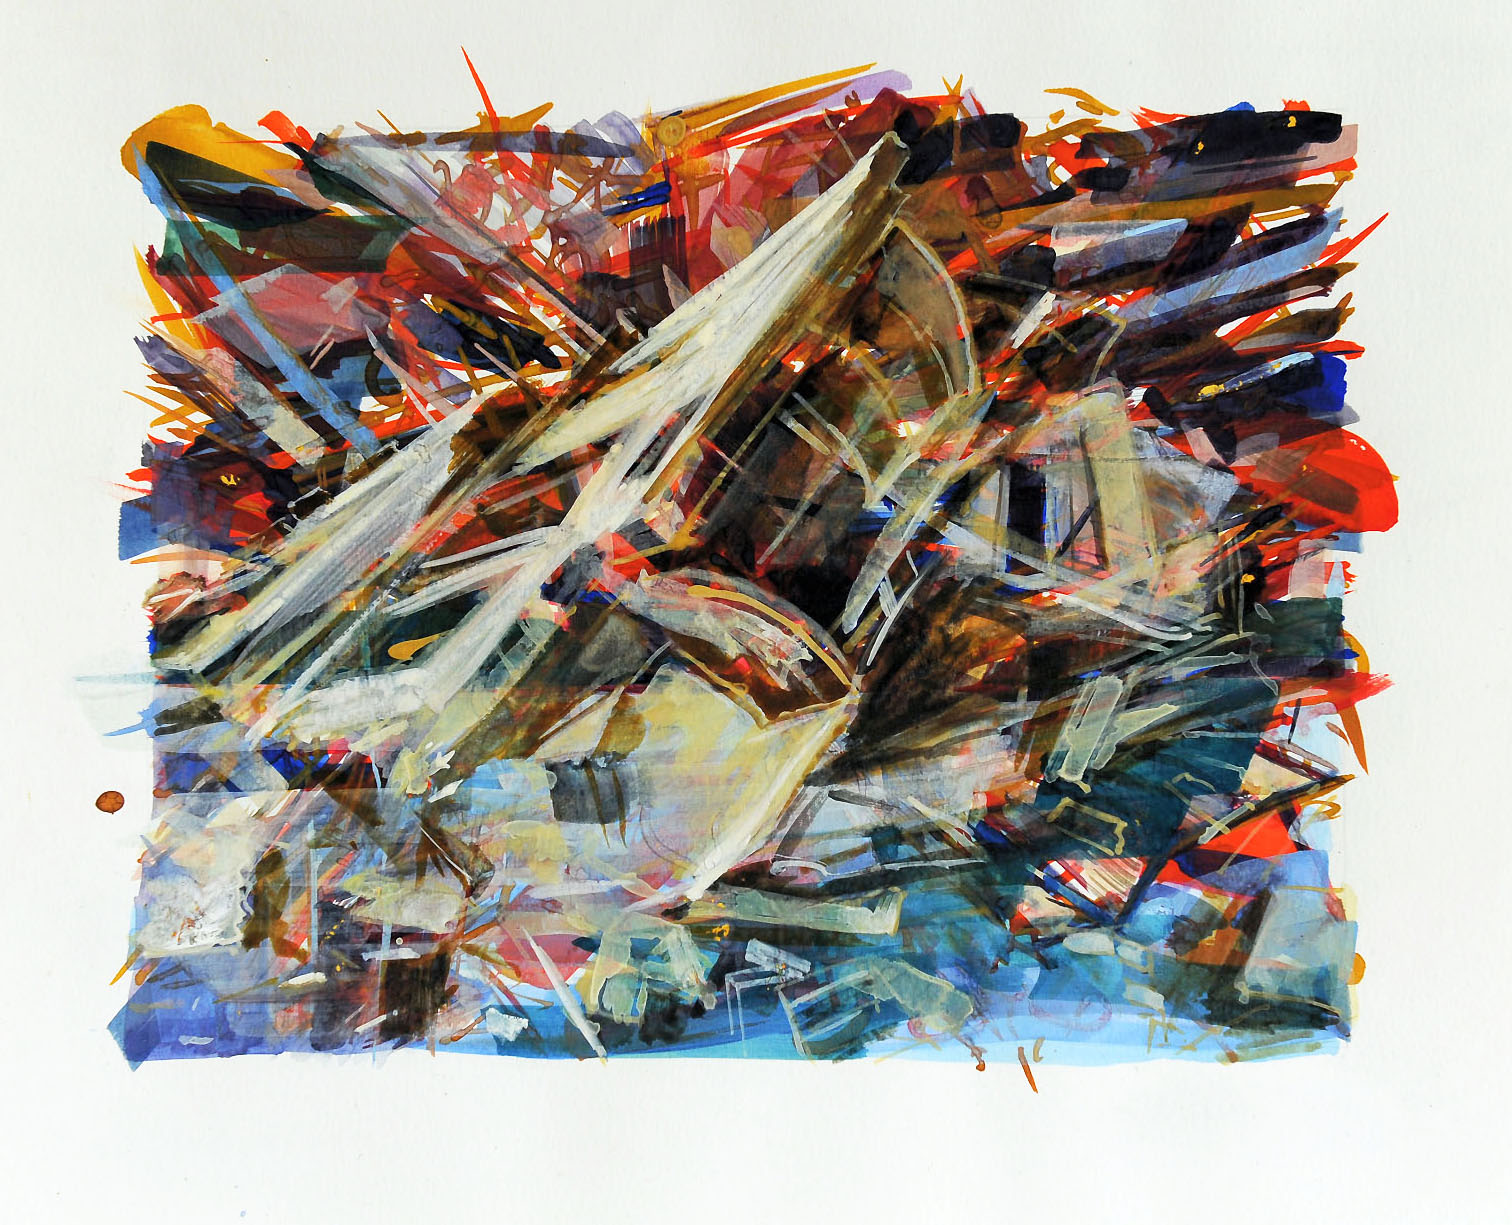   Untitled , 2009, gouache and watercolour on paper,&nbsp;26 x 32 cm. Private collection, France 